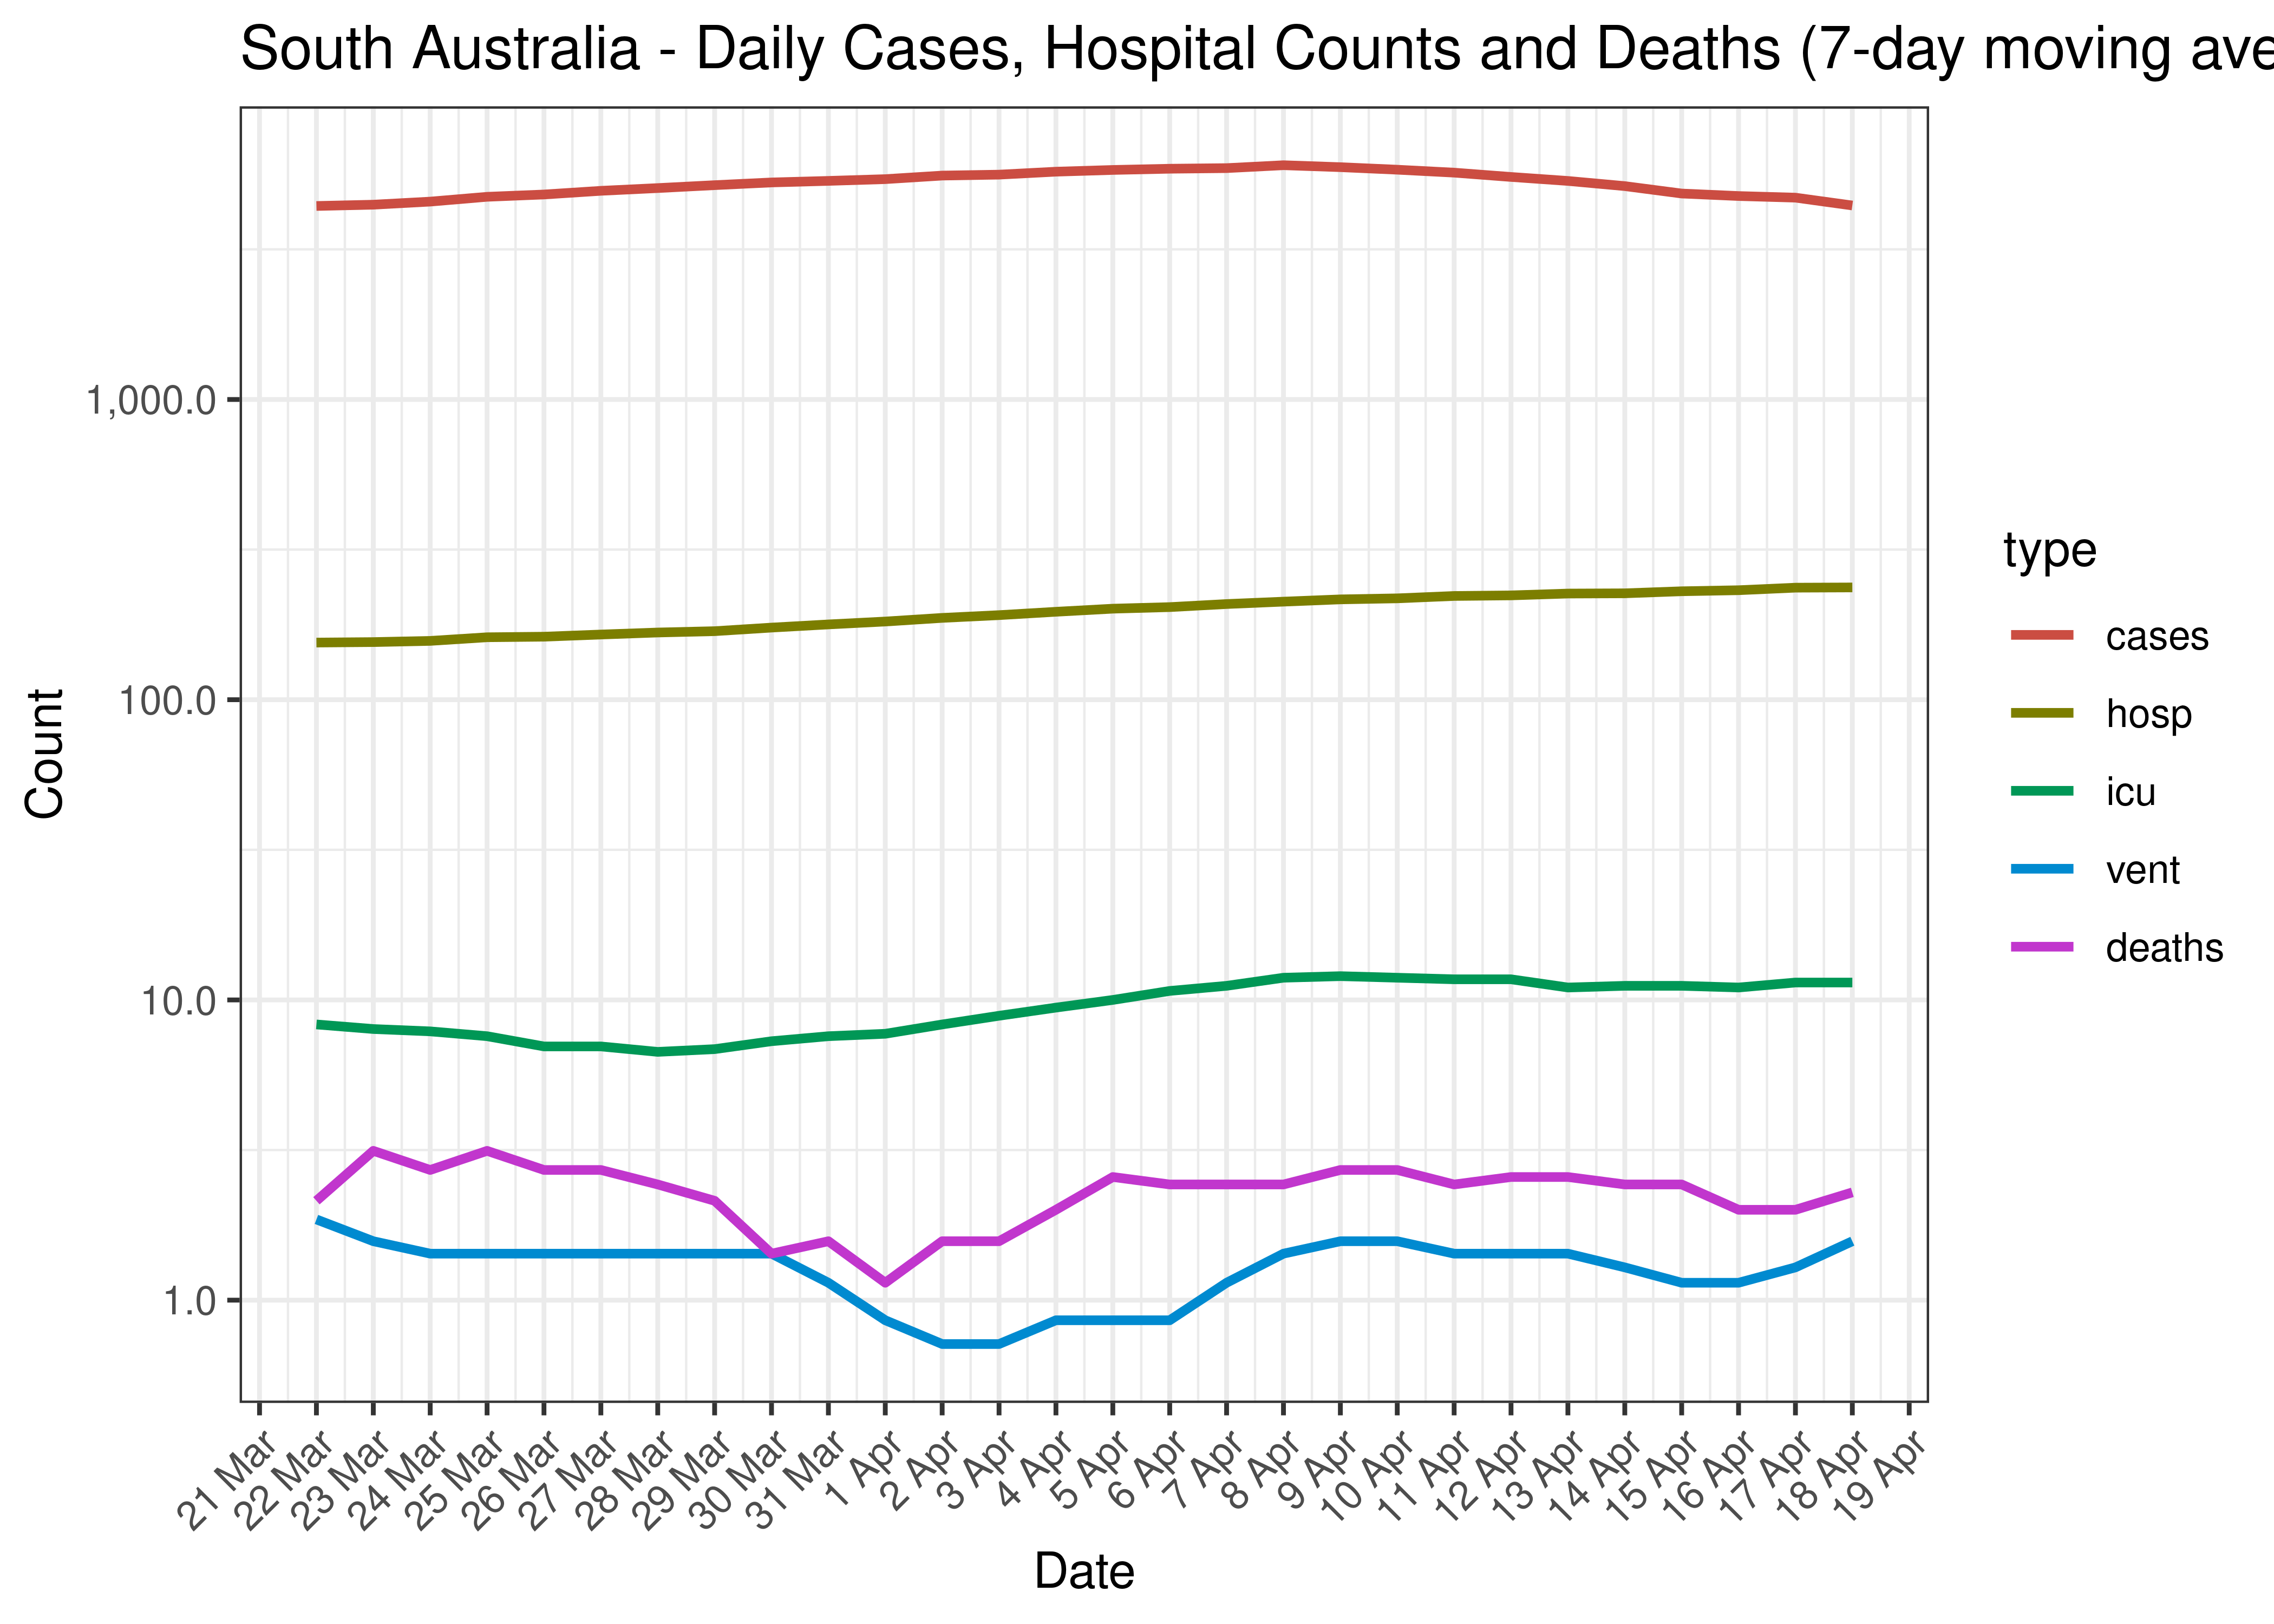 South Australia - Daily Cases, Admissions and Deaths for Last 30-days (7-day moving average)